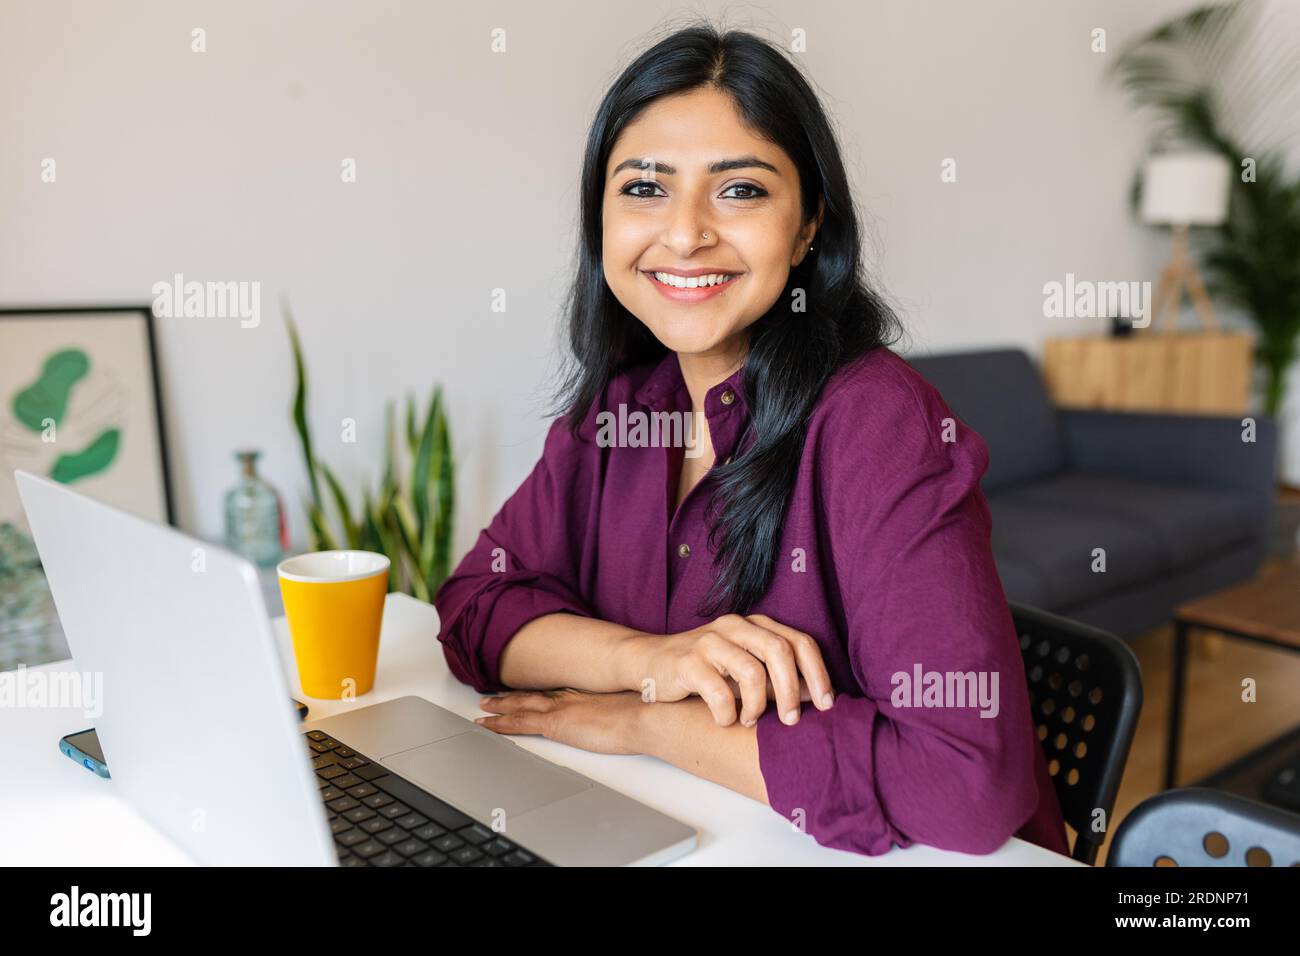 Young indian woman smile at camera working with laptop at home Stock Photo